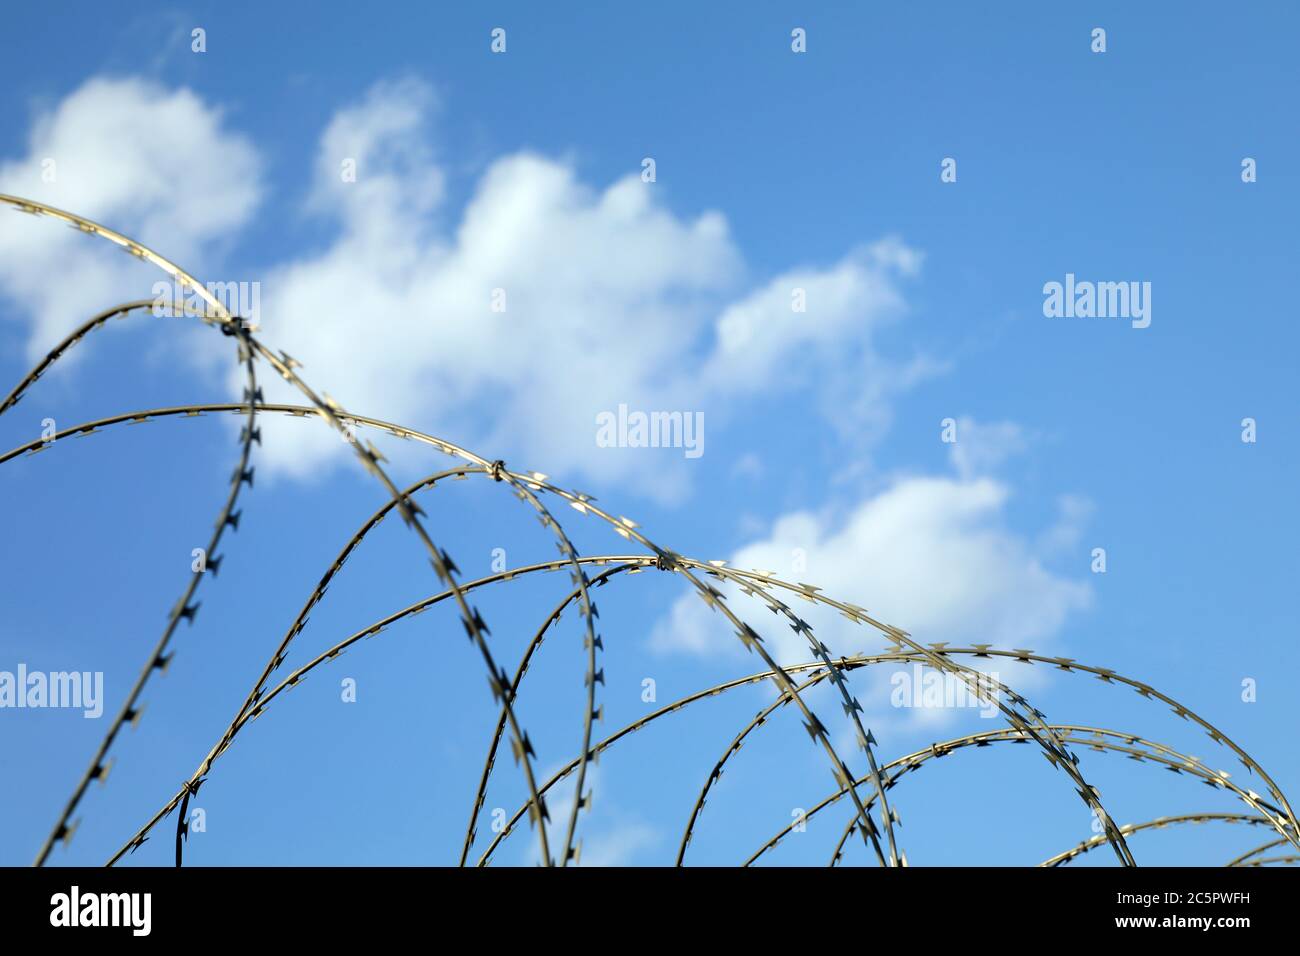 barbed wire fence of security or forbidden guarded area zone on blue sky with cluods with space for your text Stock Photo